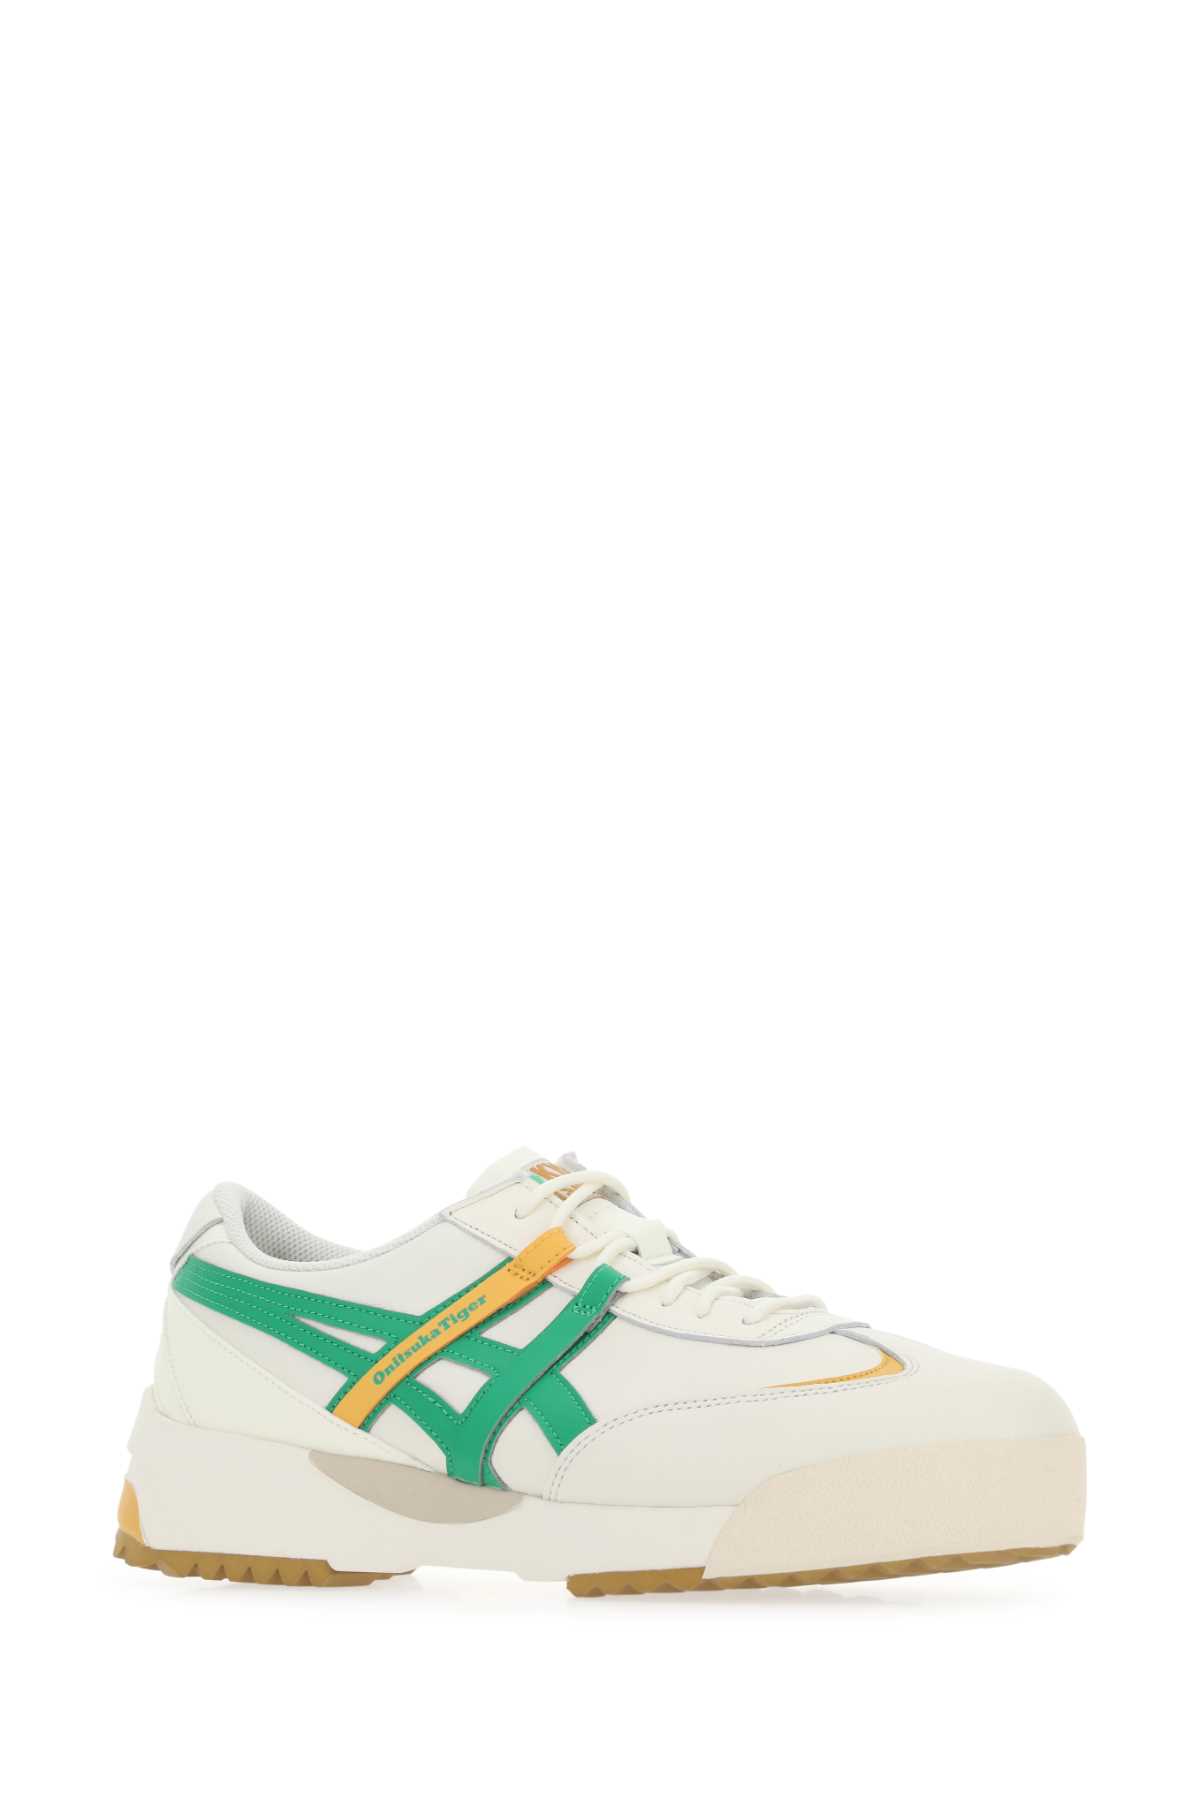 ONITSUKA TIGER MULTICOLOR LEATHER DELEGATION EX SNEAKERS